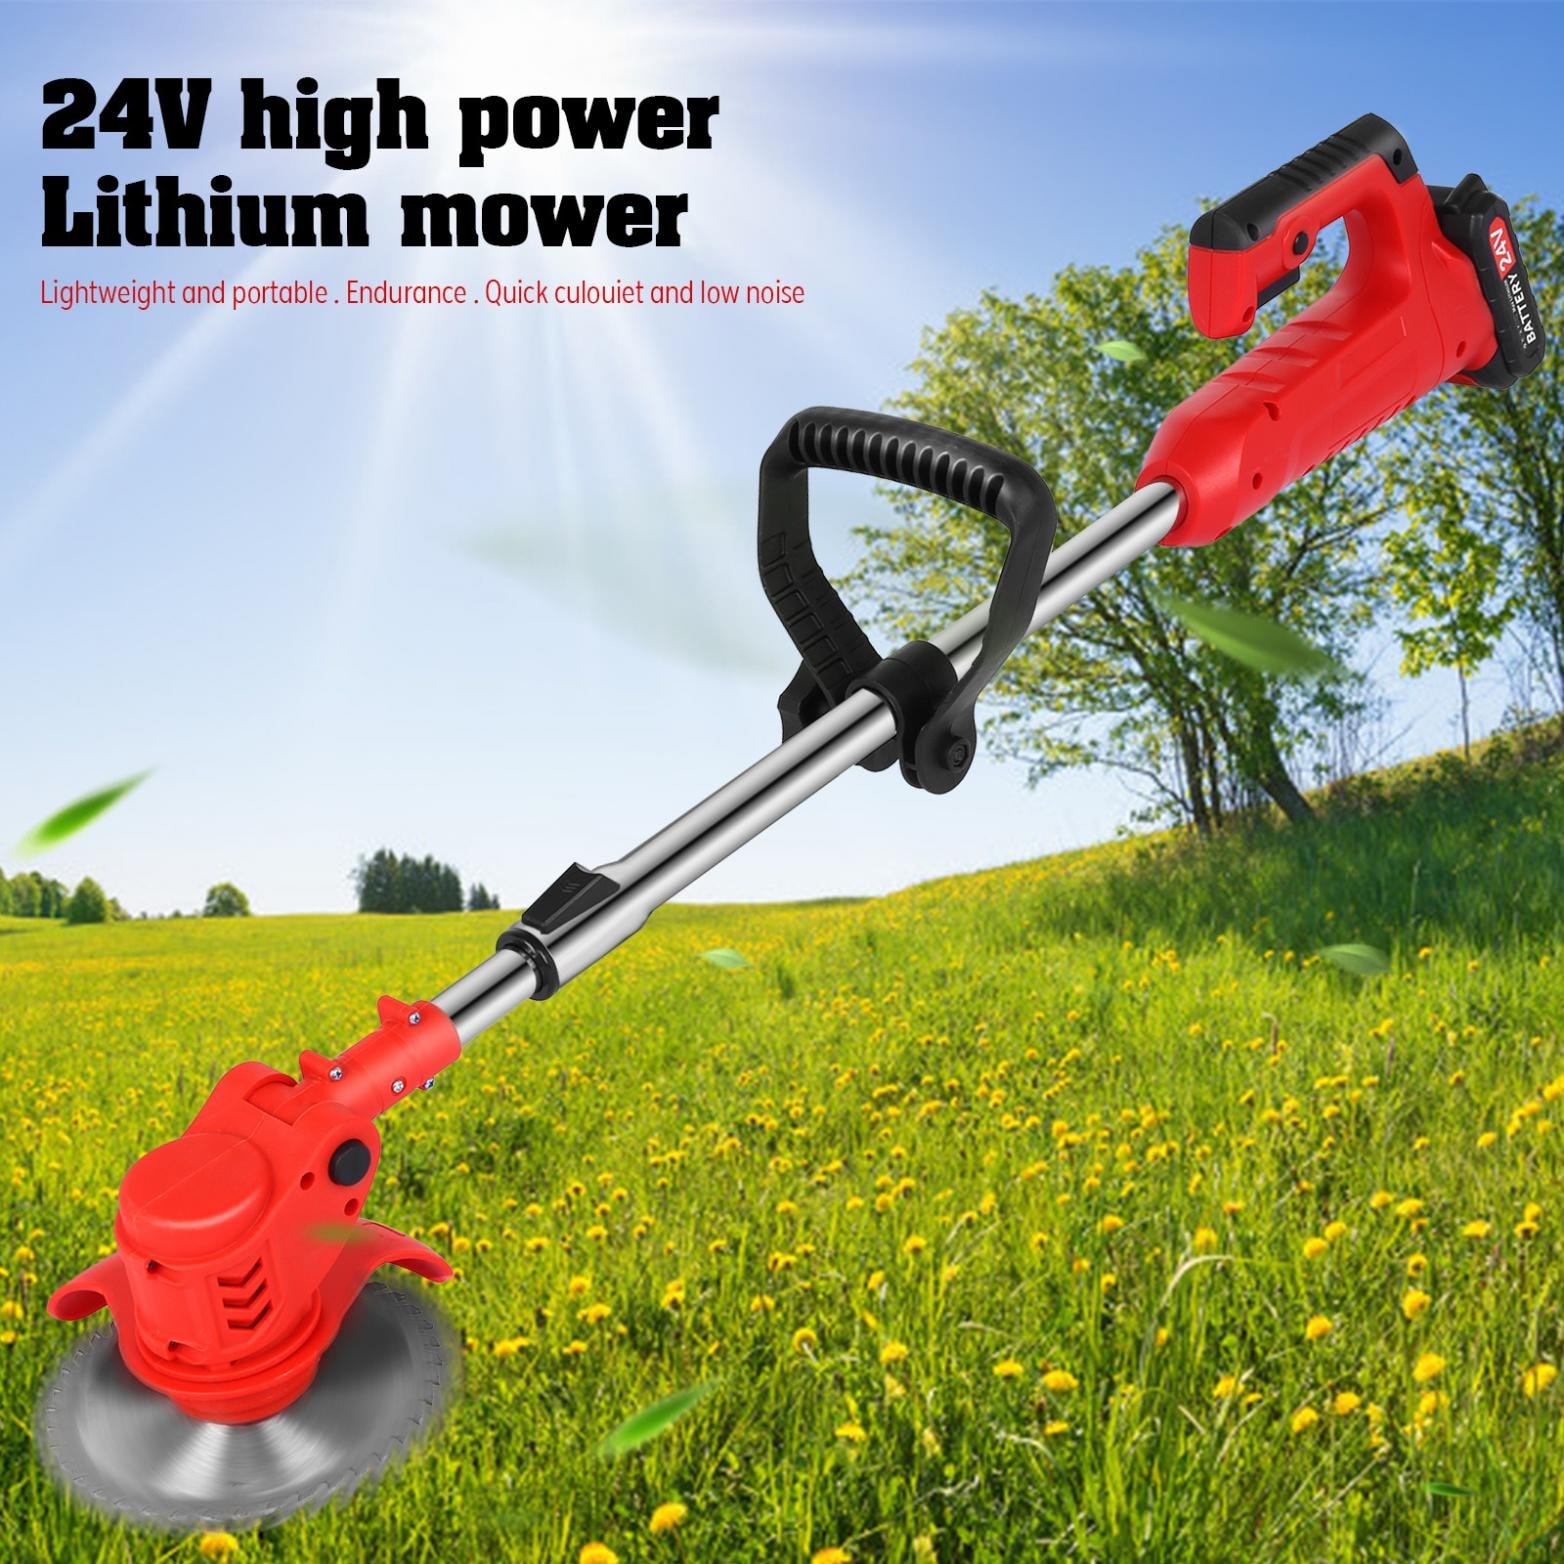 Cordless String Grass Trimmer Weed Eater With 24V ...